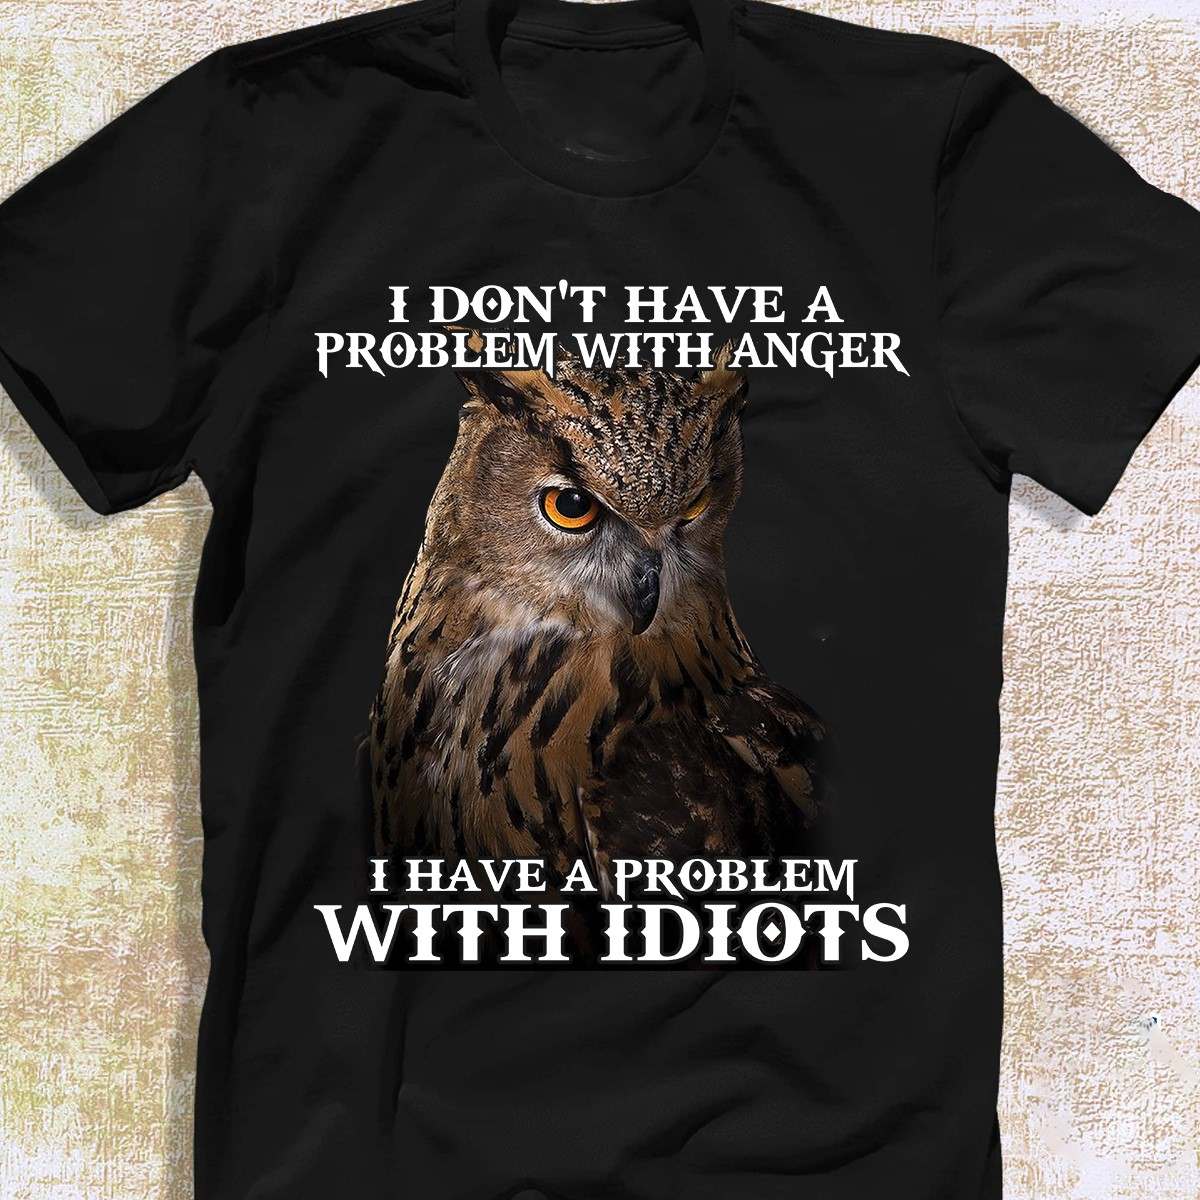 I don't have a problem with anger I have a problem with idiots - Grumpy owl